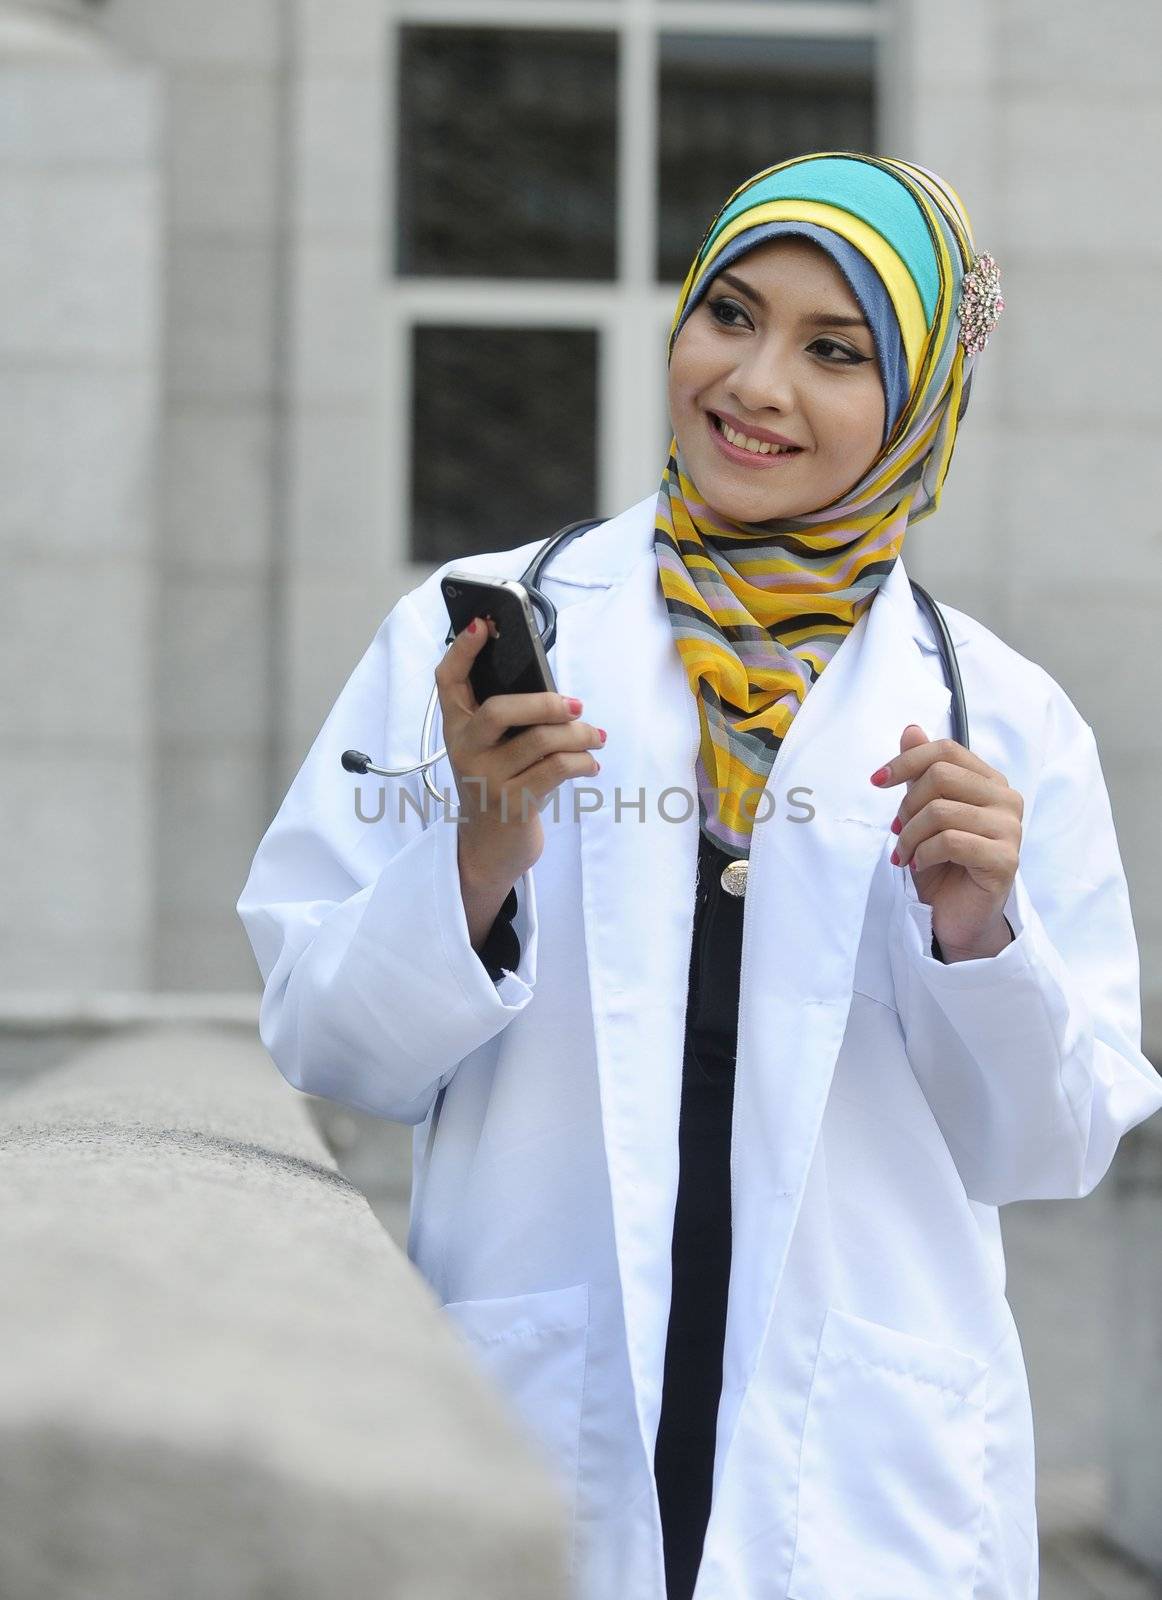 Women Doctor With Scarf use smart phone by jaggat